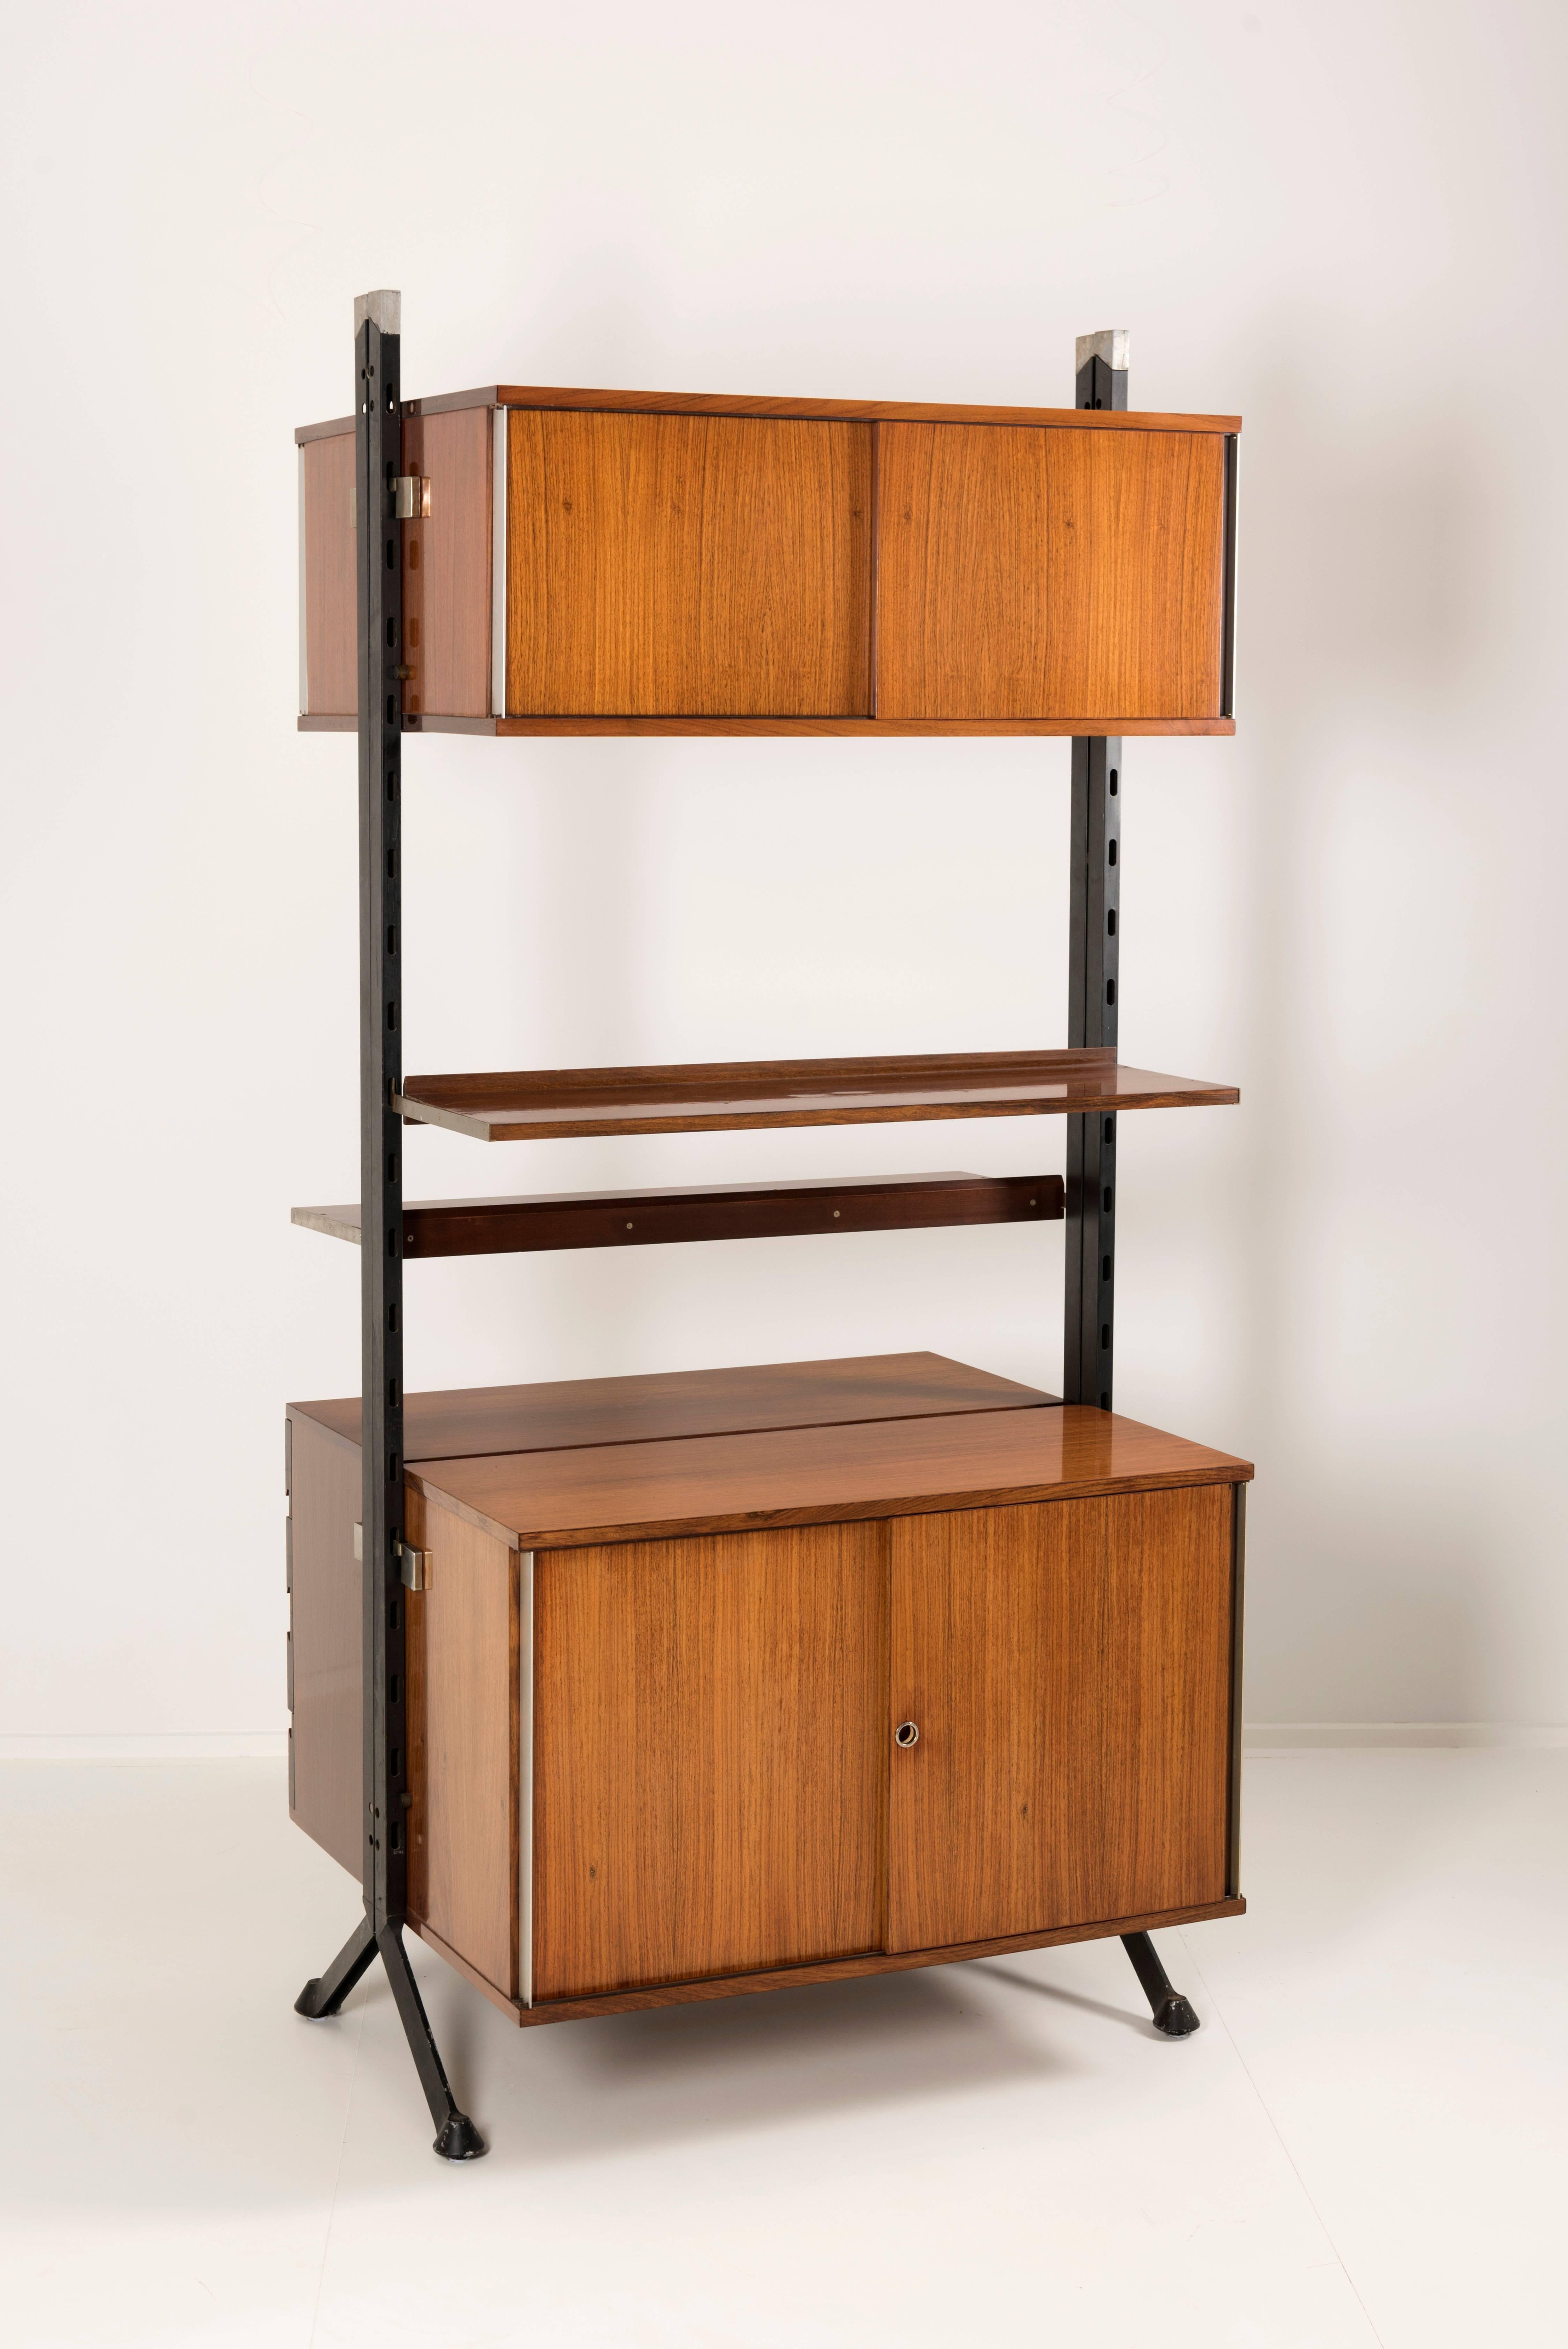 Vintage library in walnut with drawers and doors, must be placed in the middle of a room design by Ico Parisi manufactured by MIM, Italy, circa 1960.
Measure: H 215 cm 98 x 85 cm.